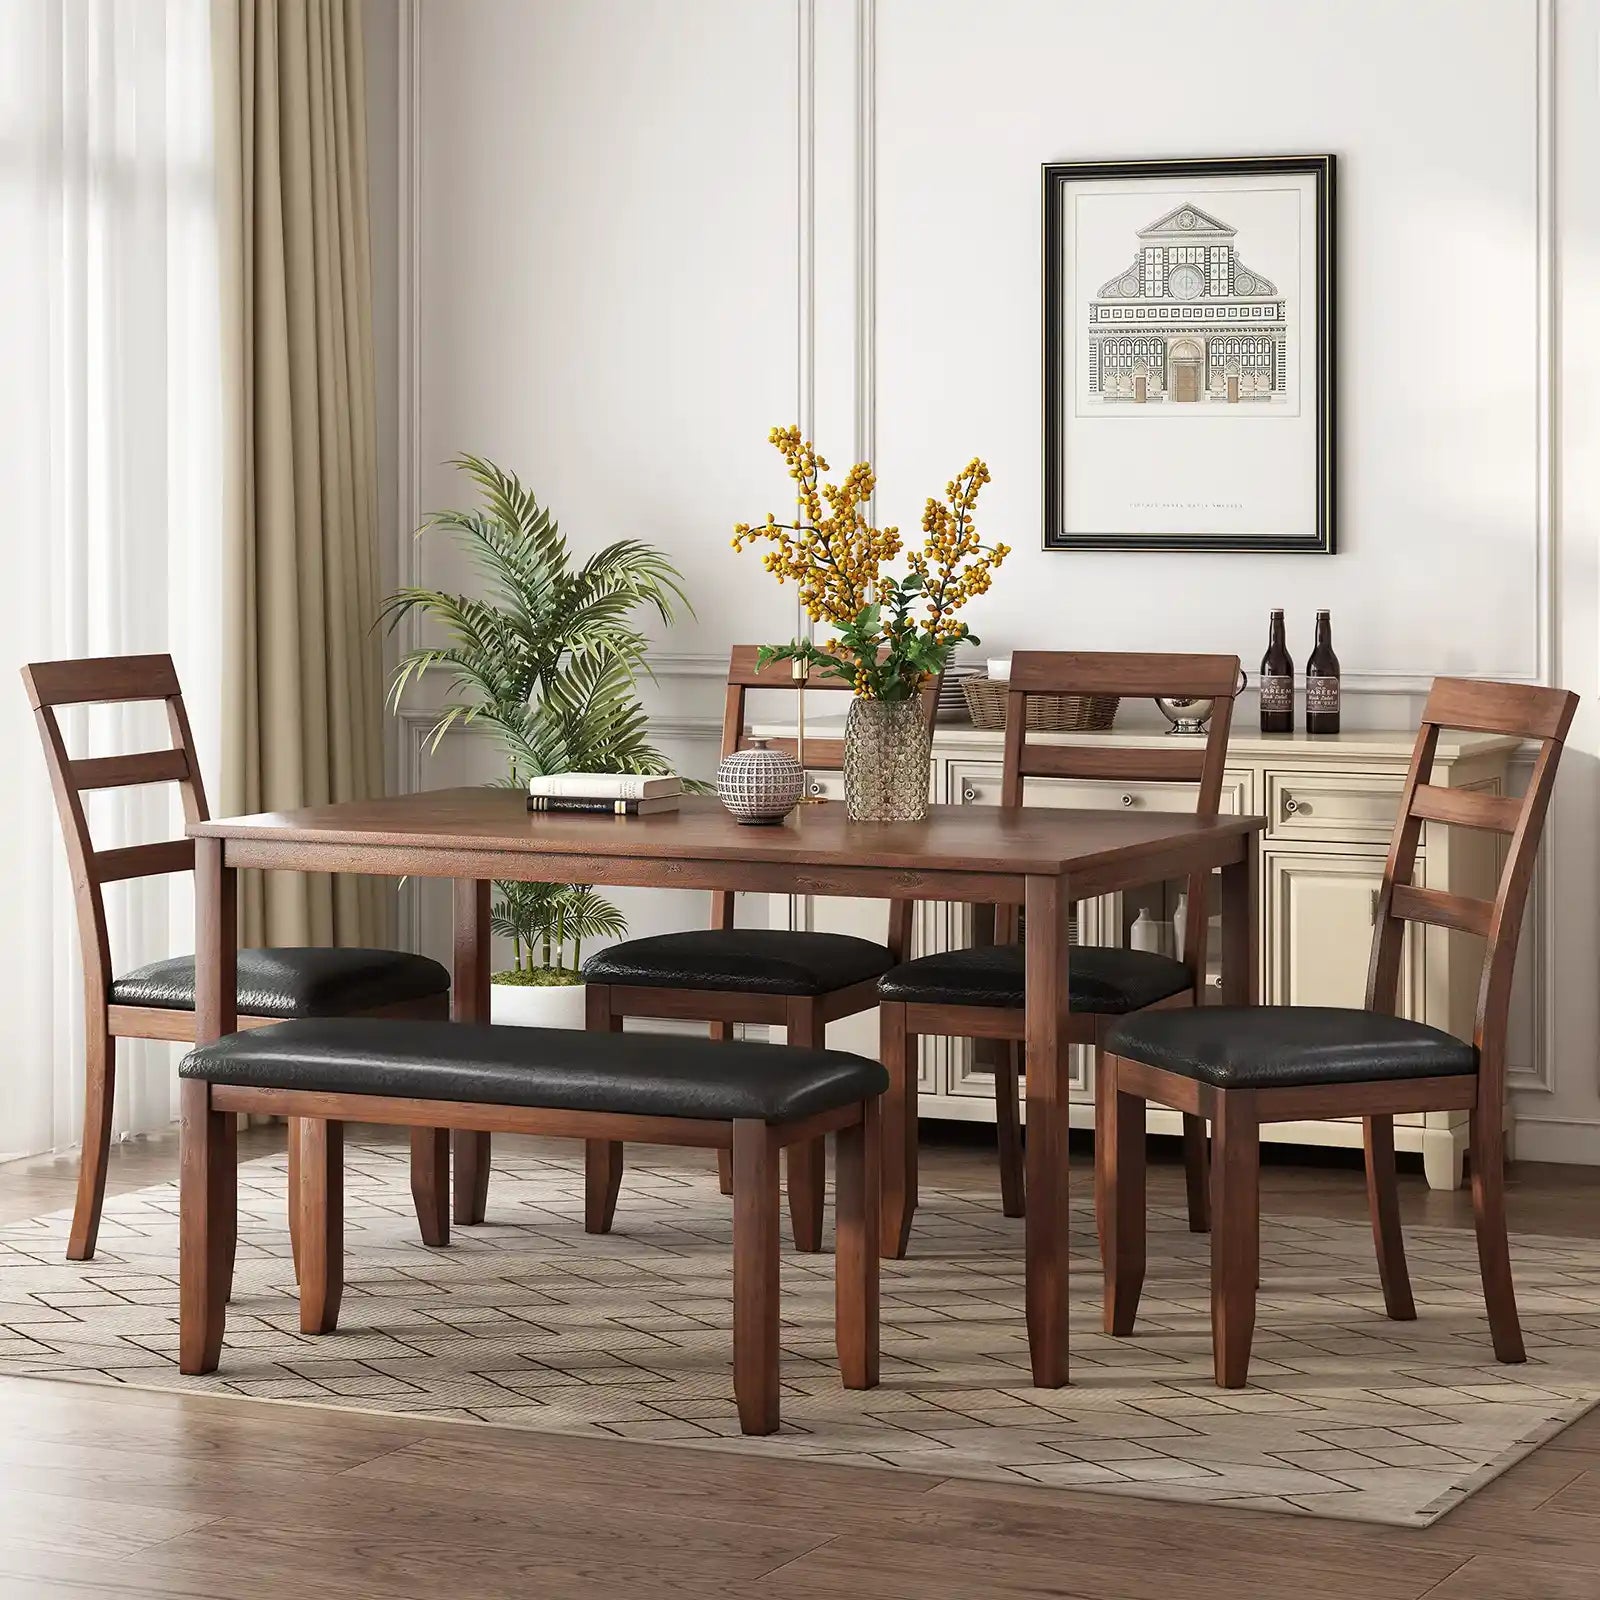 Dining Table Set for 6, Rustic Country Acacia Table Set with 4 Chairs and Bench